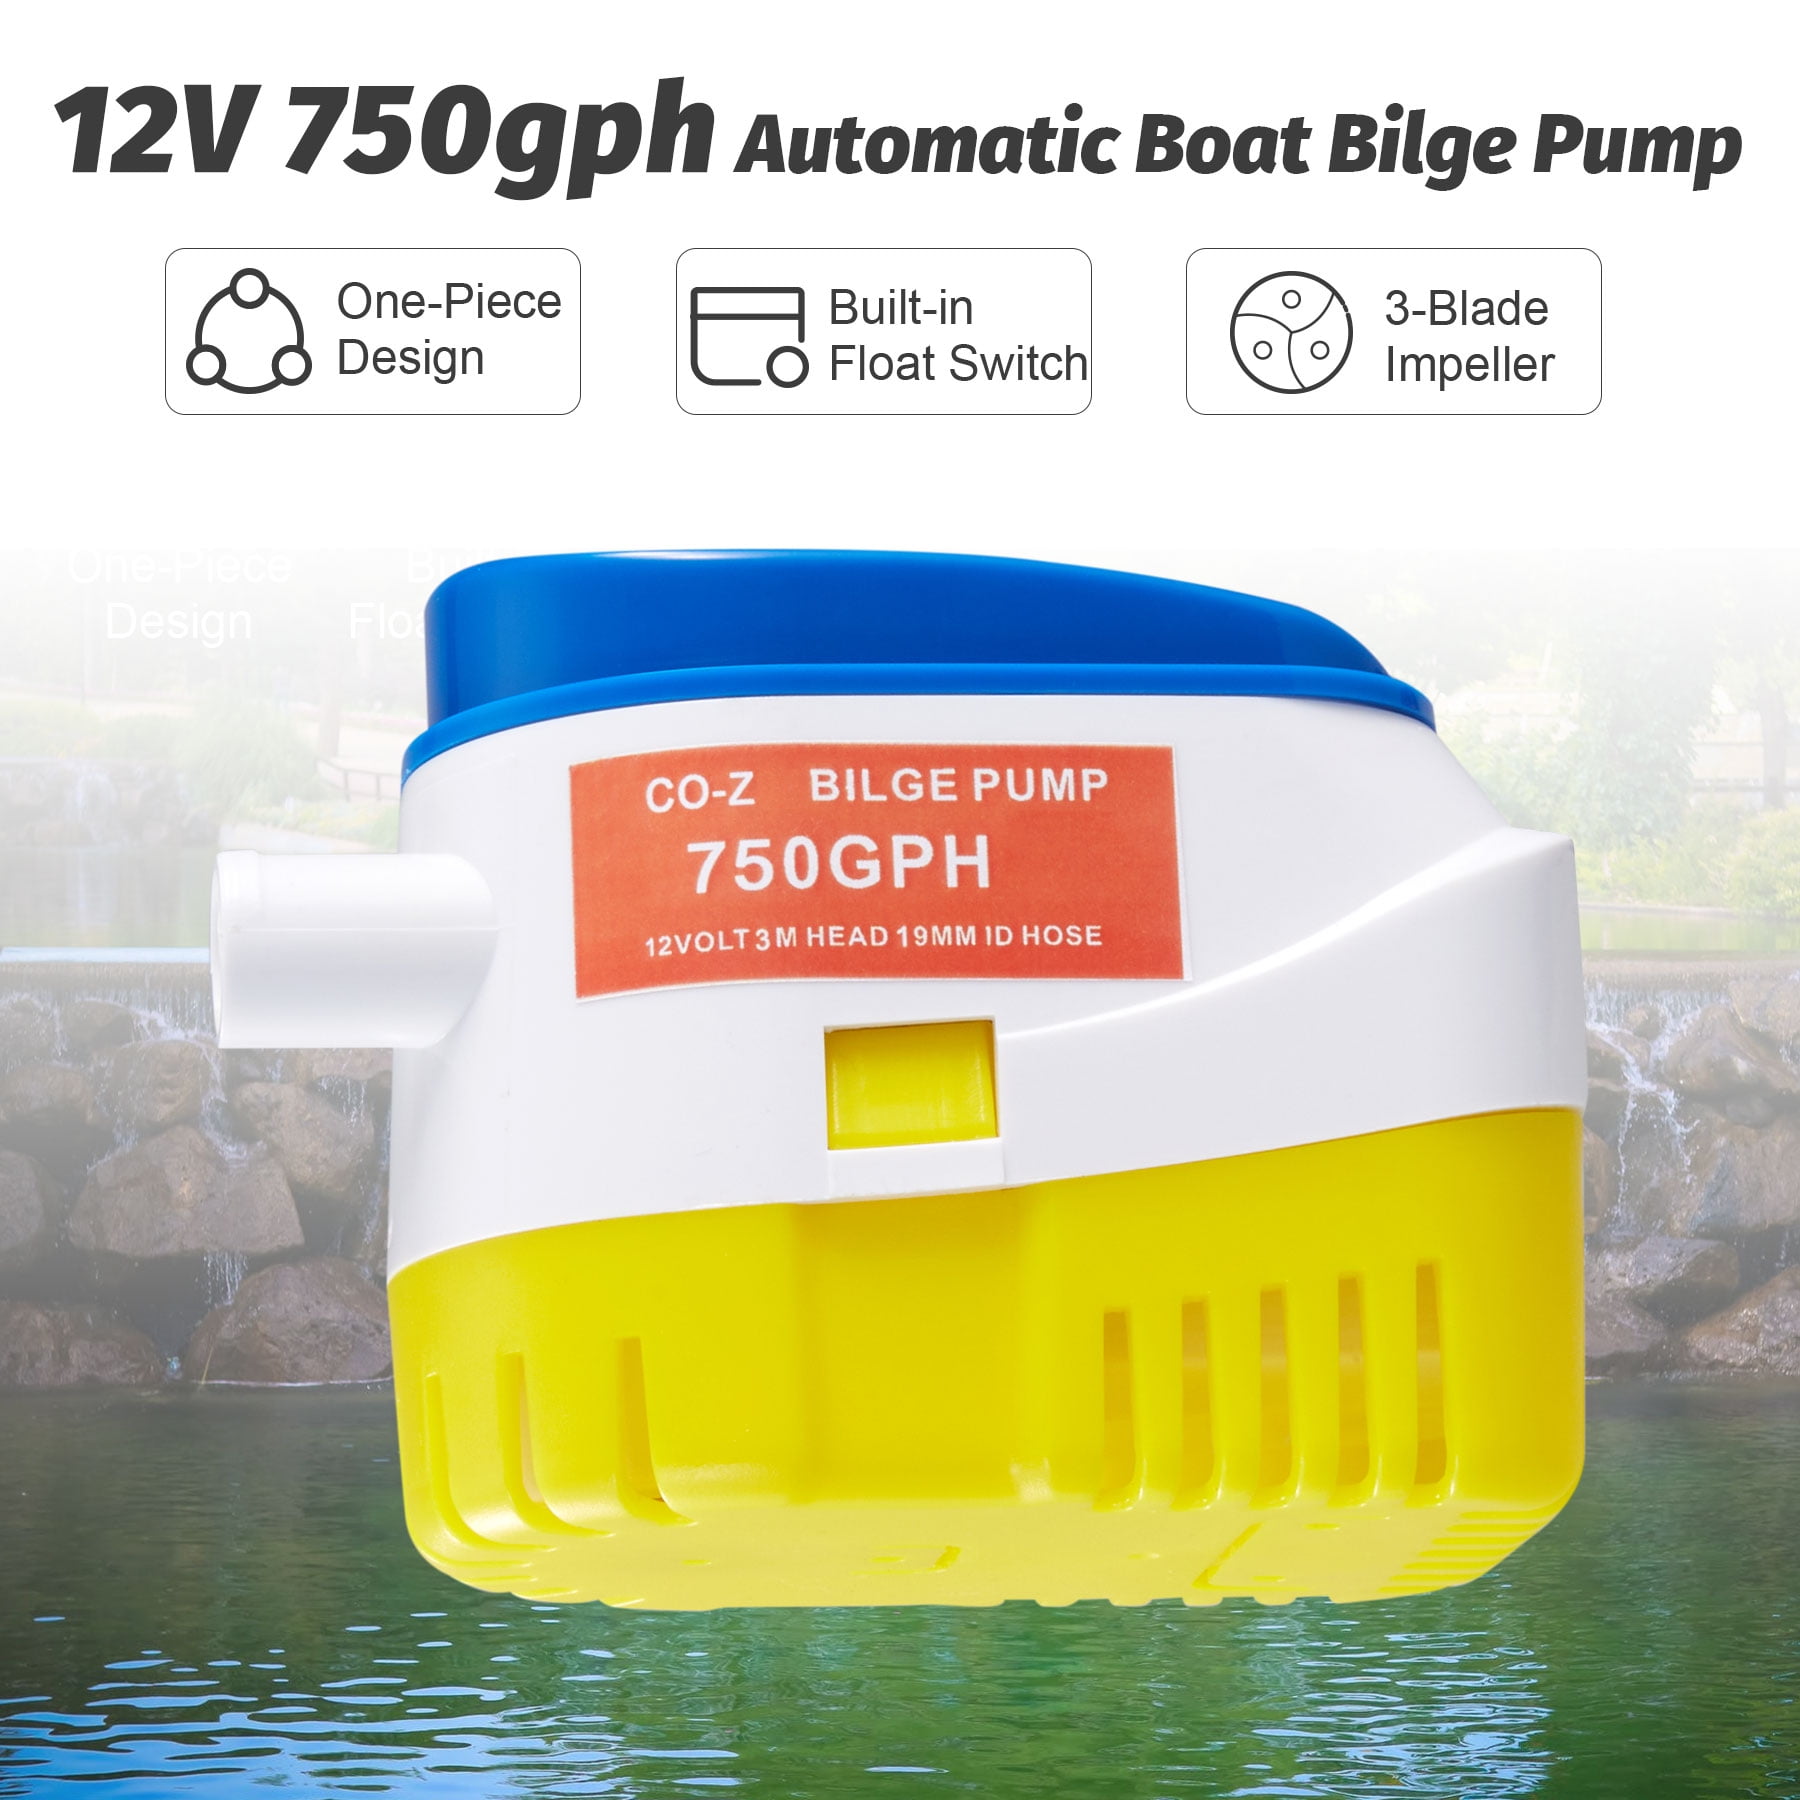 NEW Submersible Boat Bilge Pump FLOAT SWITCH 12V Auto Electric Marine Watercraft 